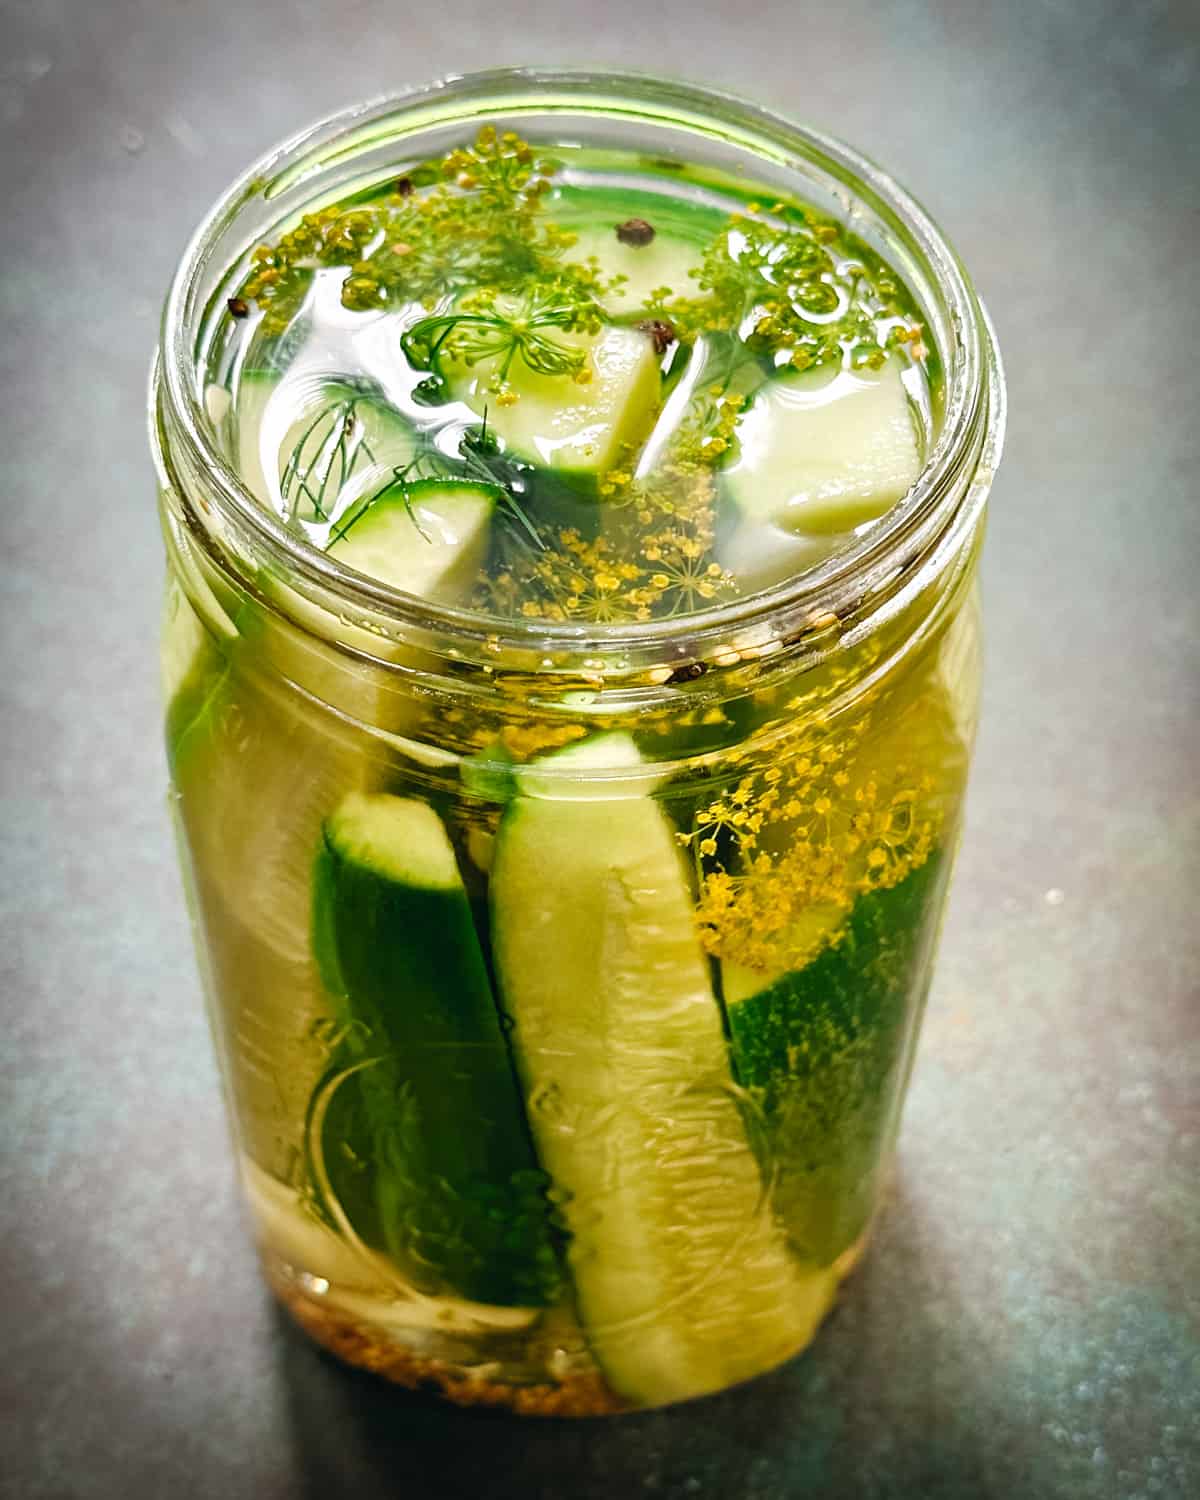 A jar of cucumbers submerged in pickling liquid with fresh and whole spices, ready to be pickled.